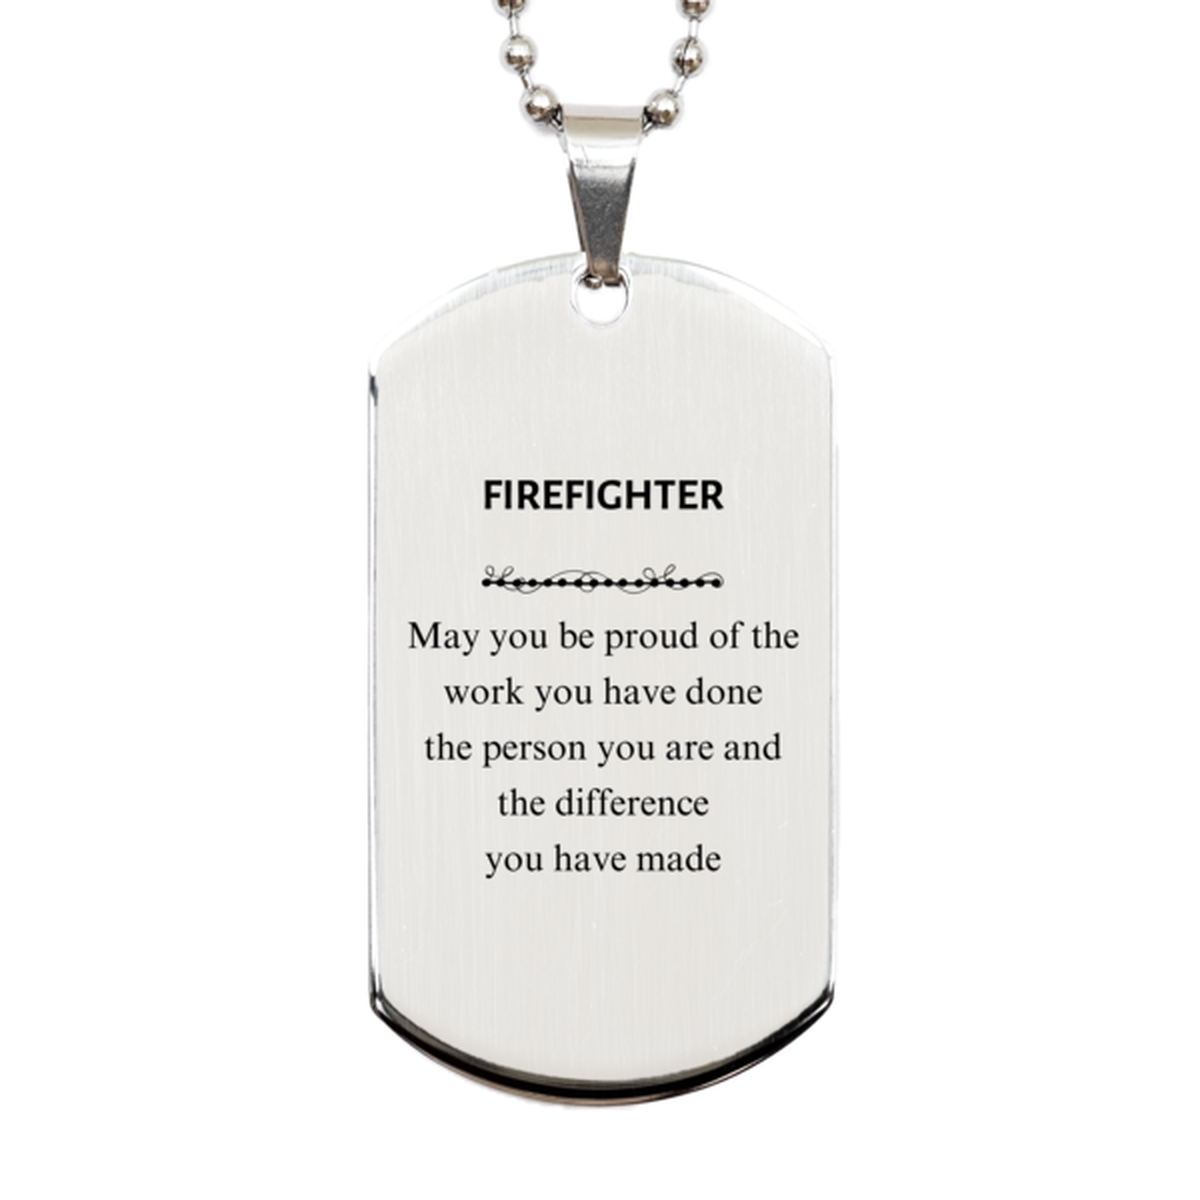 Firefighter May you be proud of the work you have done, Retirement Firefighter Silver Dog Tag for Colleague Appreciation Gifts Amazing for Firefighter